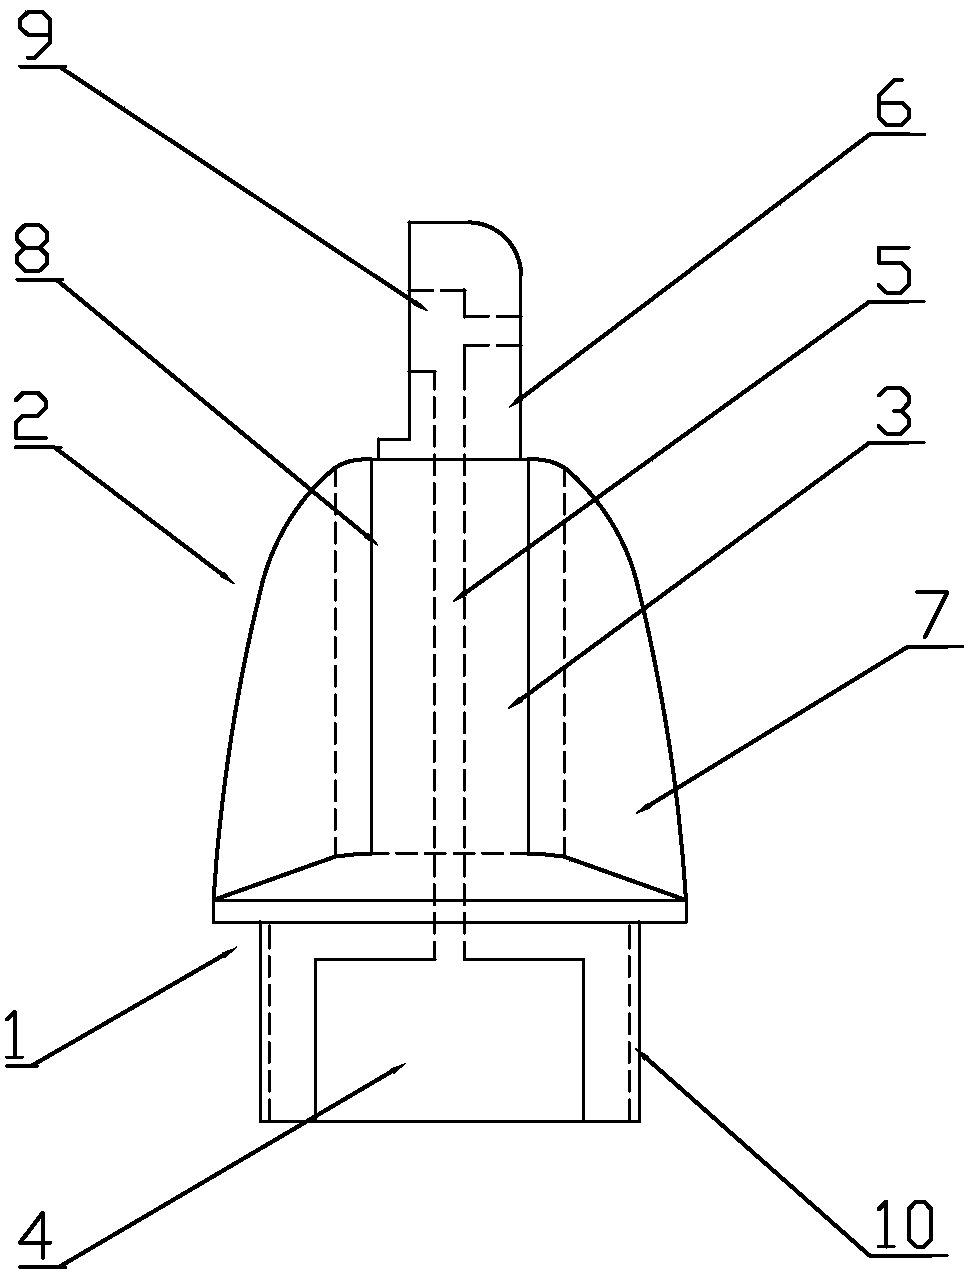 A precision forging forming process for the lamp body of a high-power LED floor lamp